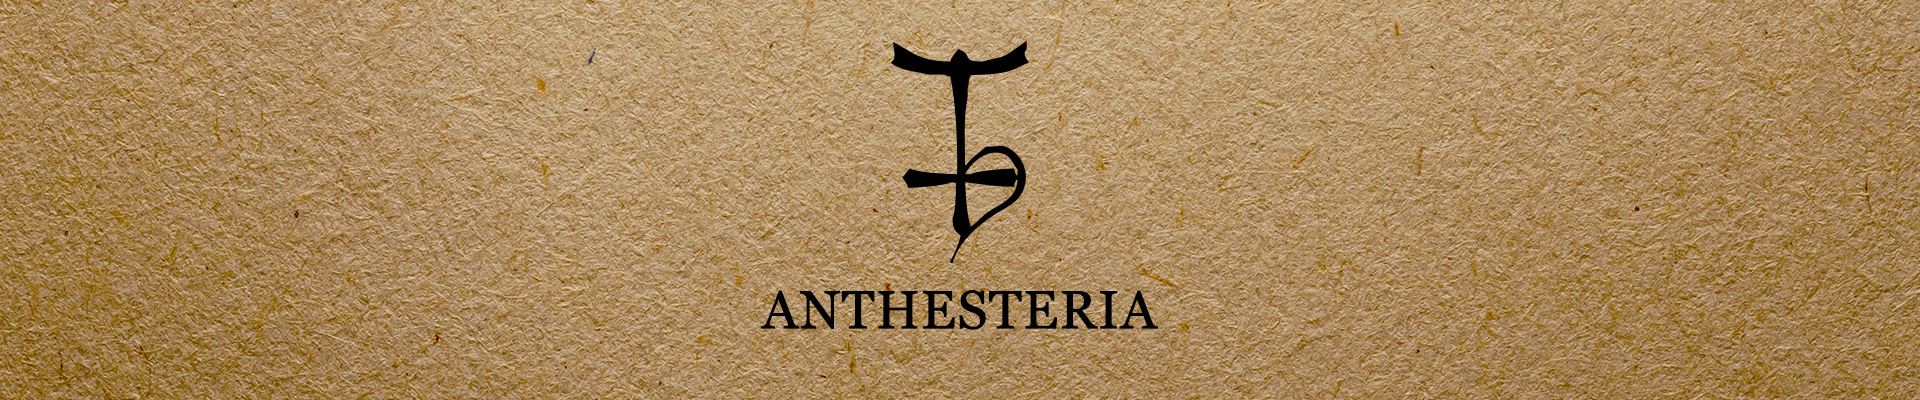 Few notes on: Anthesteria